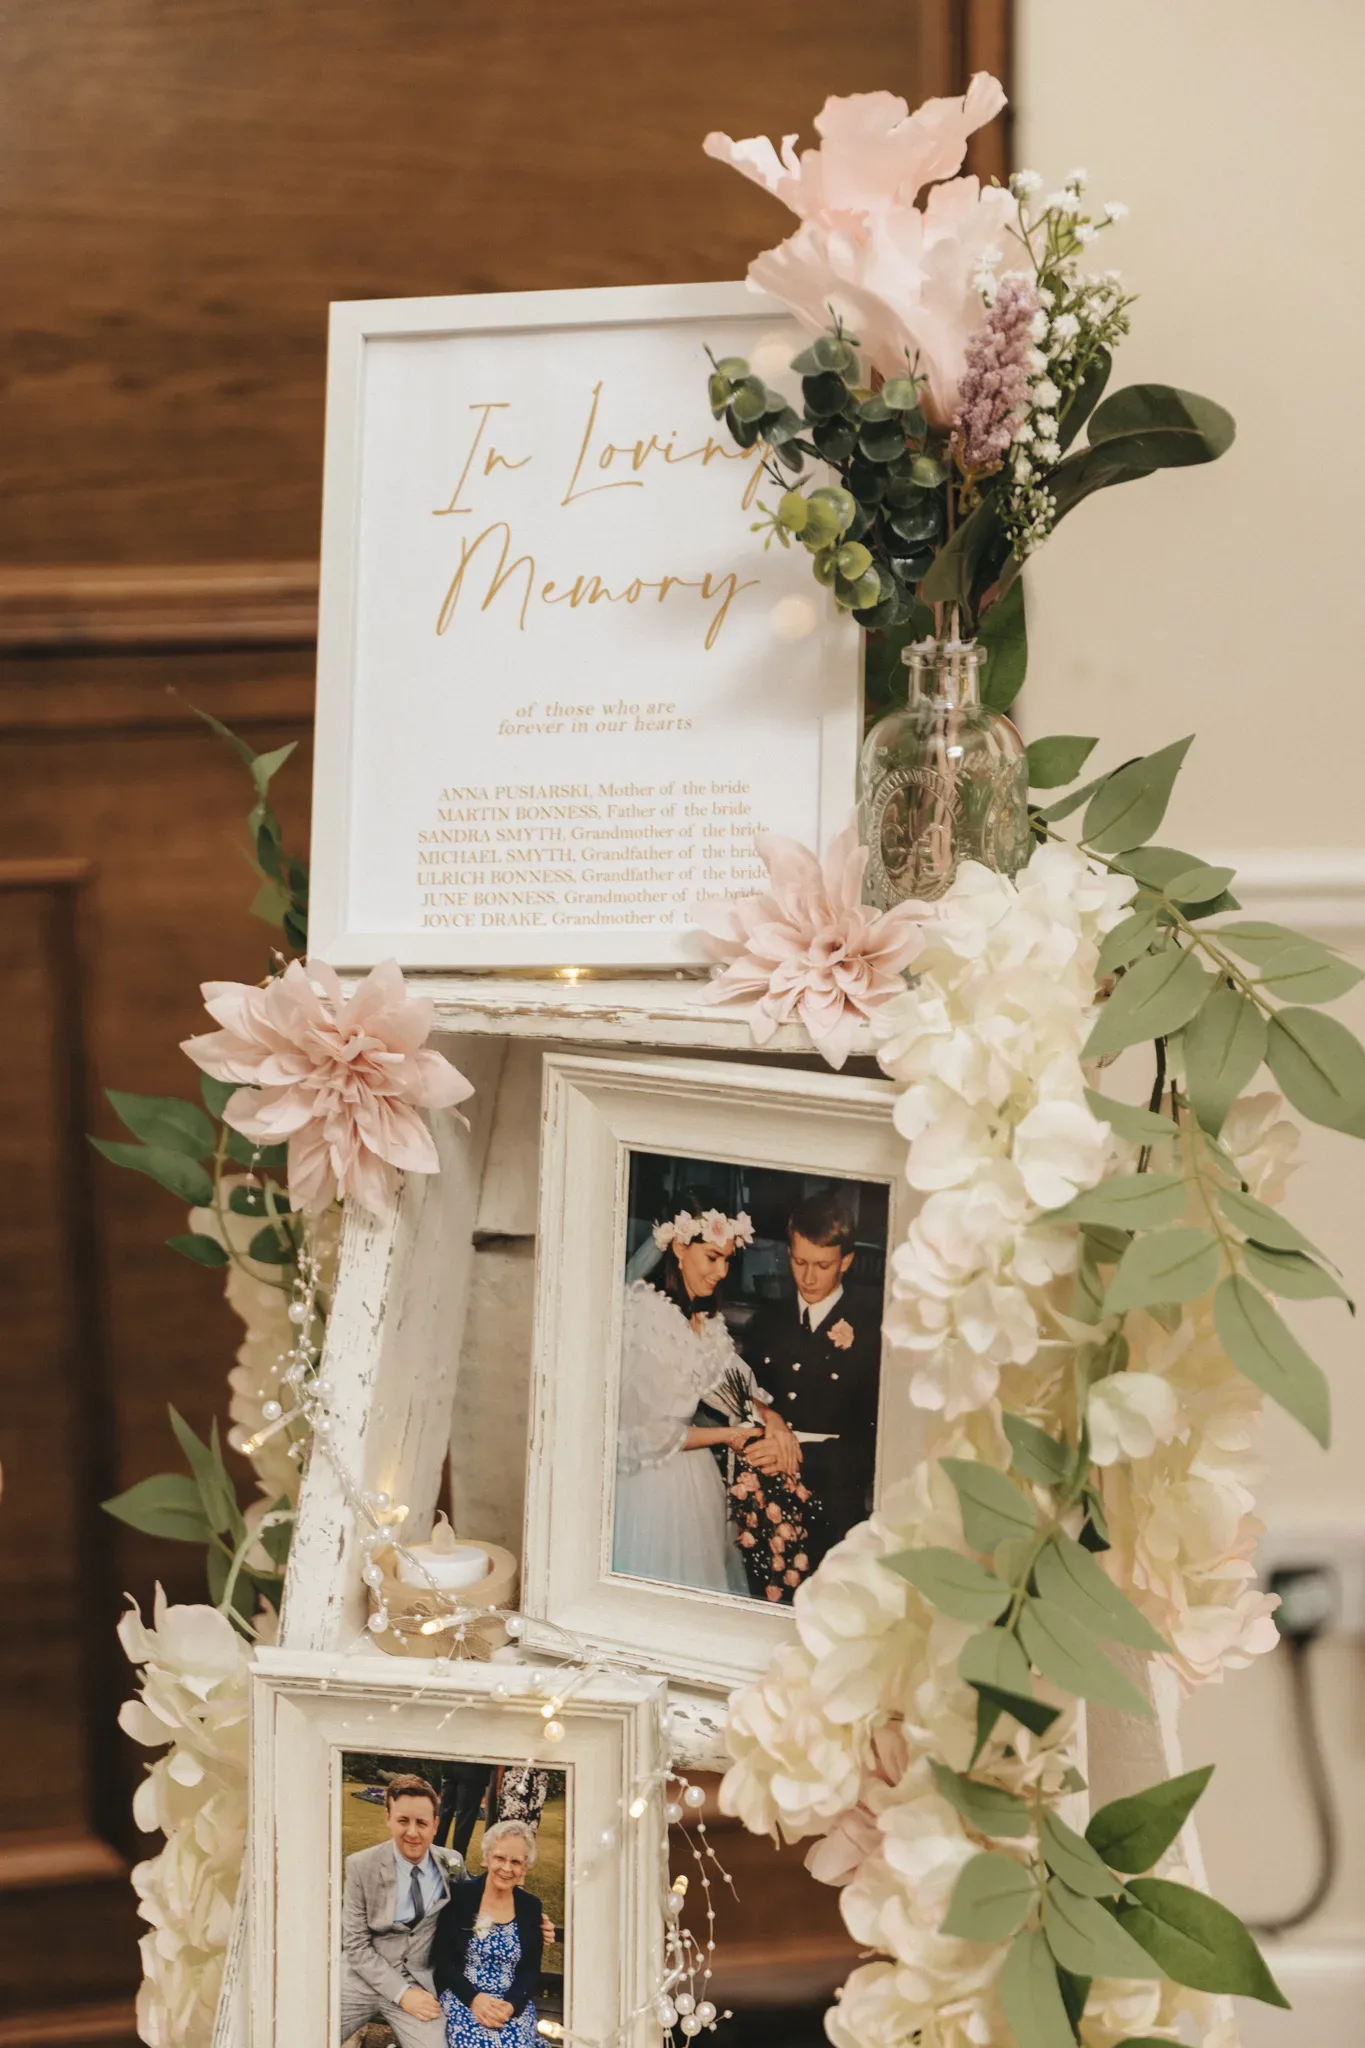 A memorial display features a floral arrangement and photos within a white, tiered stand. a sign reading "in loving memory" lists names of the deceased. the decor includes soft pink flowers and string lights.